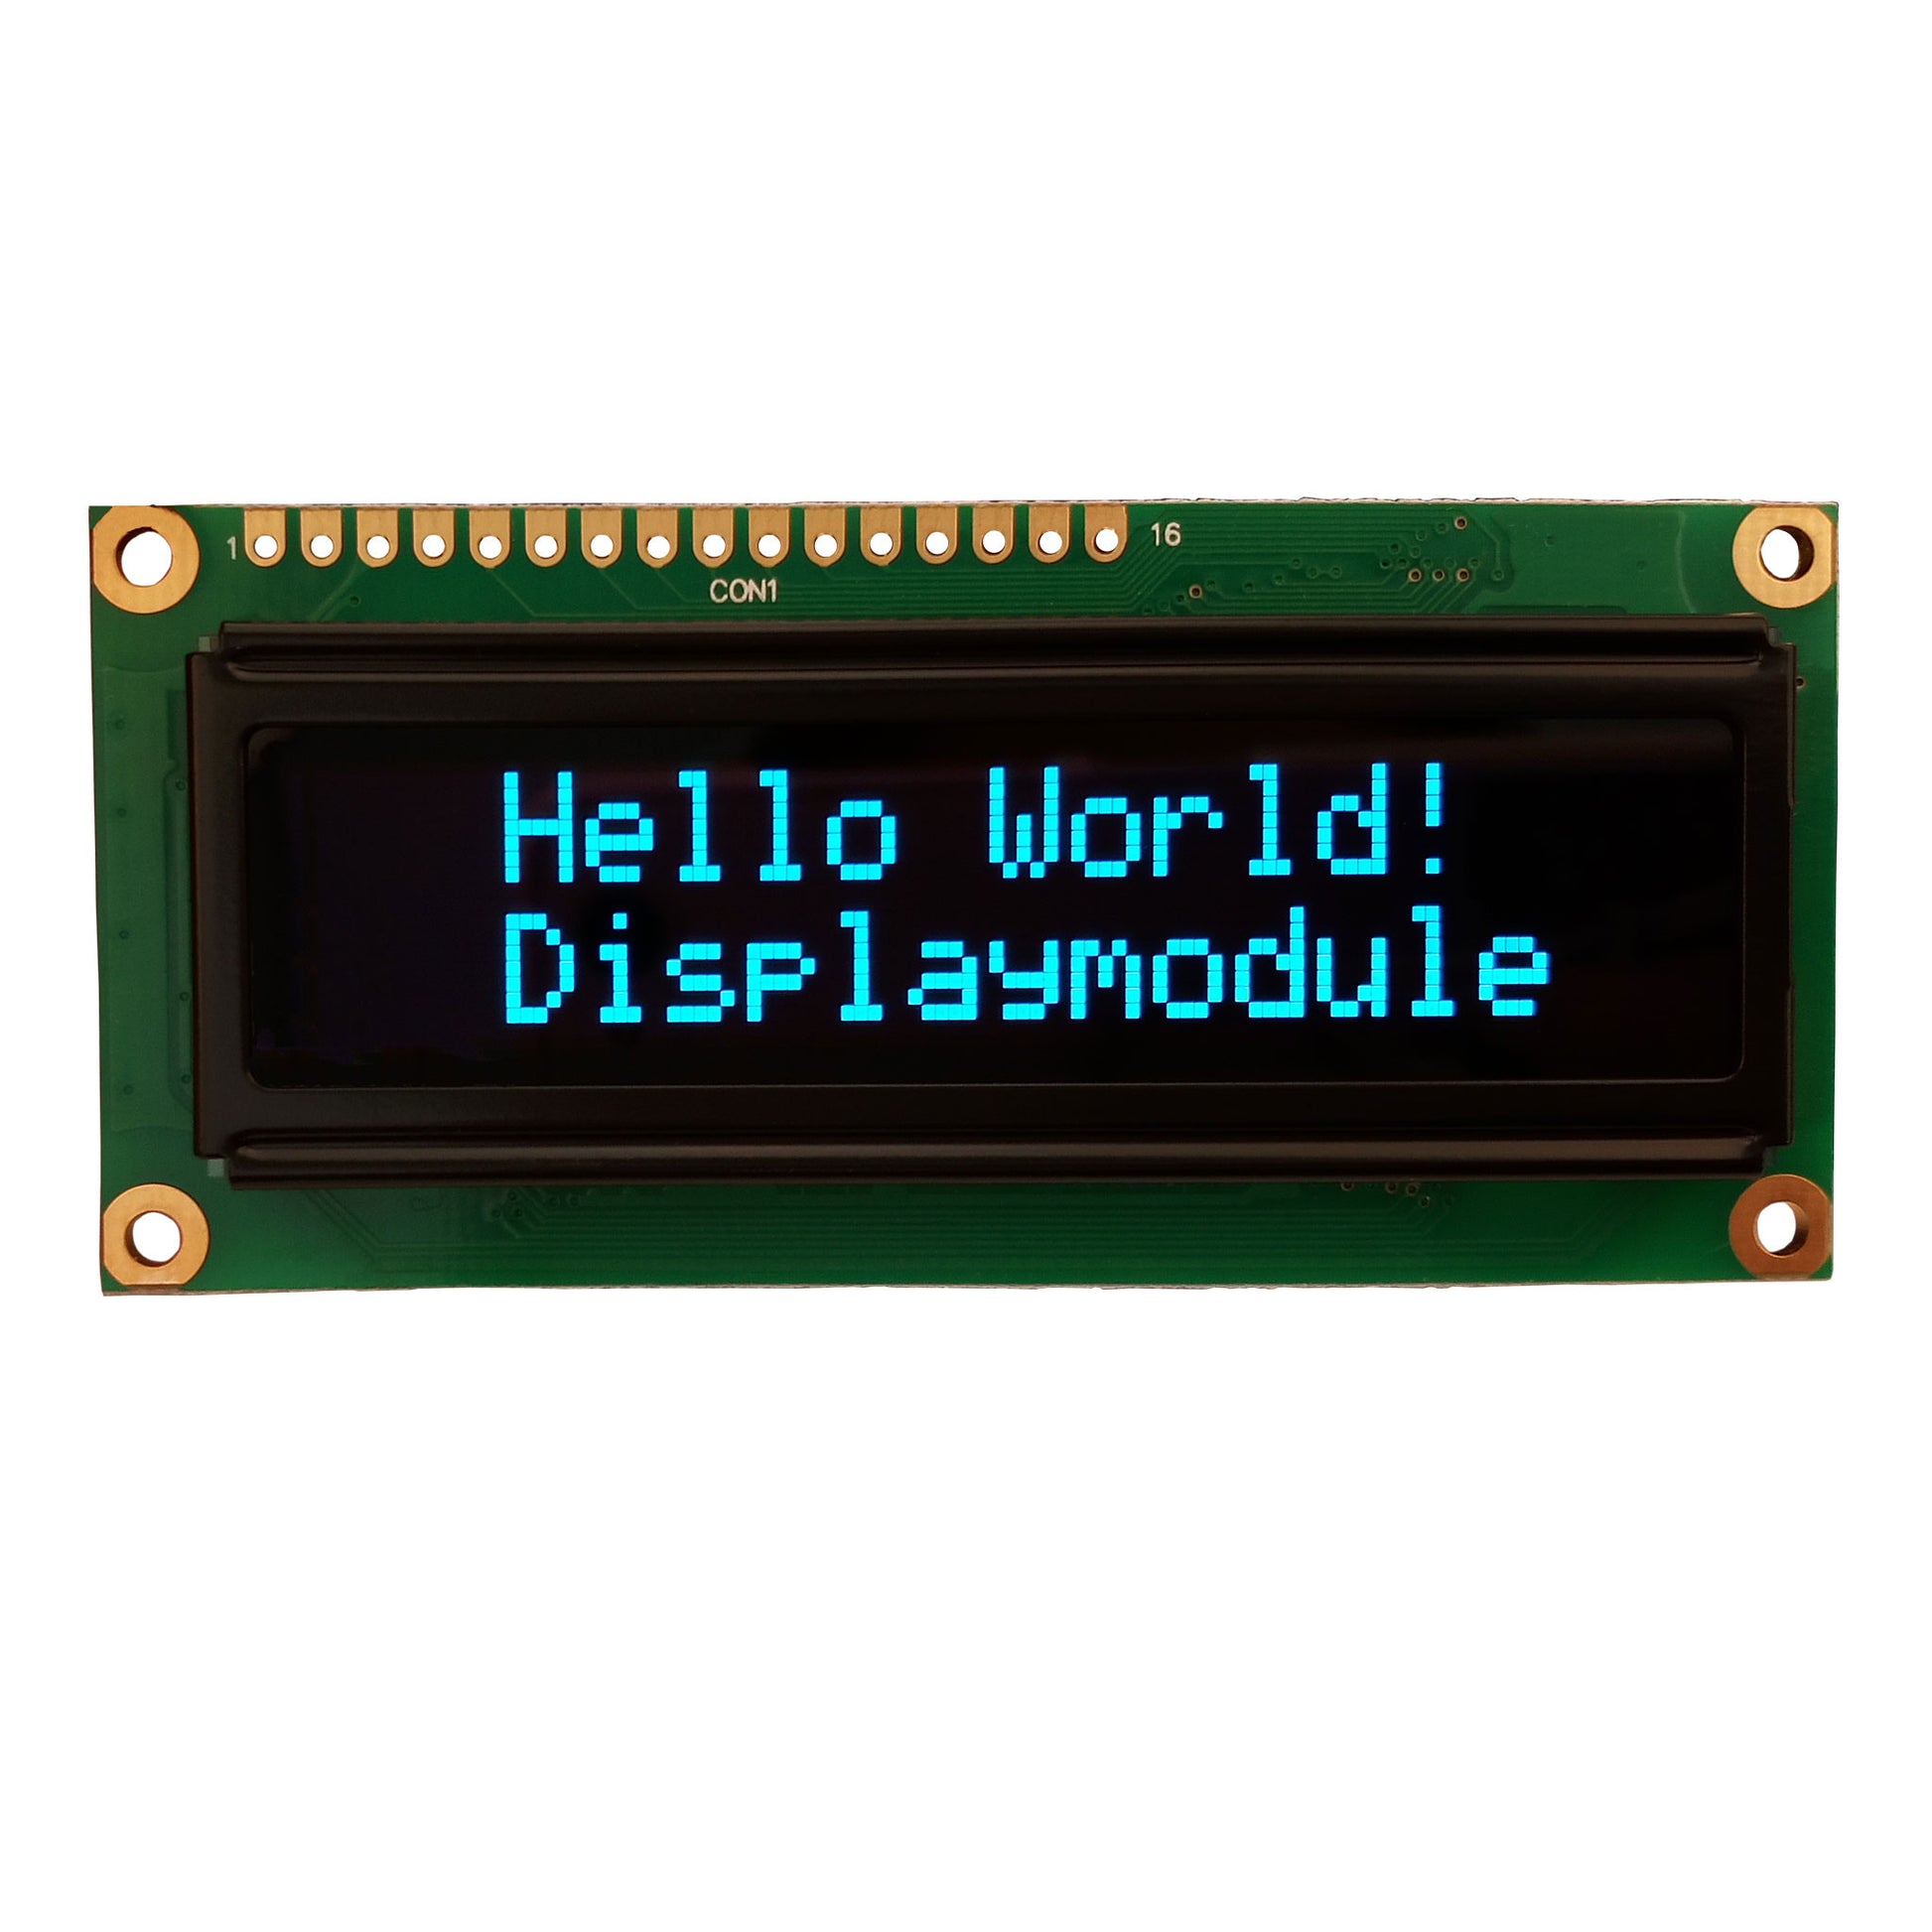 16x2 OLED character display module showing "Hello World! Displaymodule" with MCU, SPI, and I2C interfaces